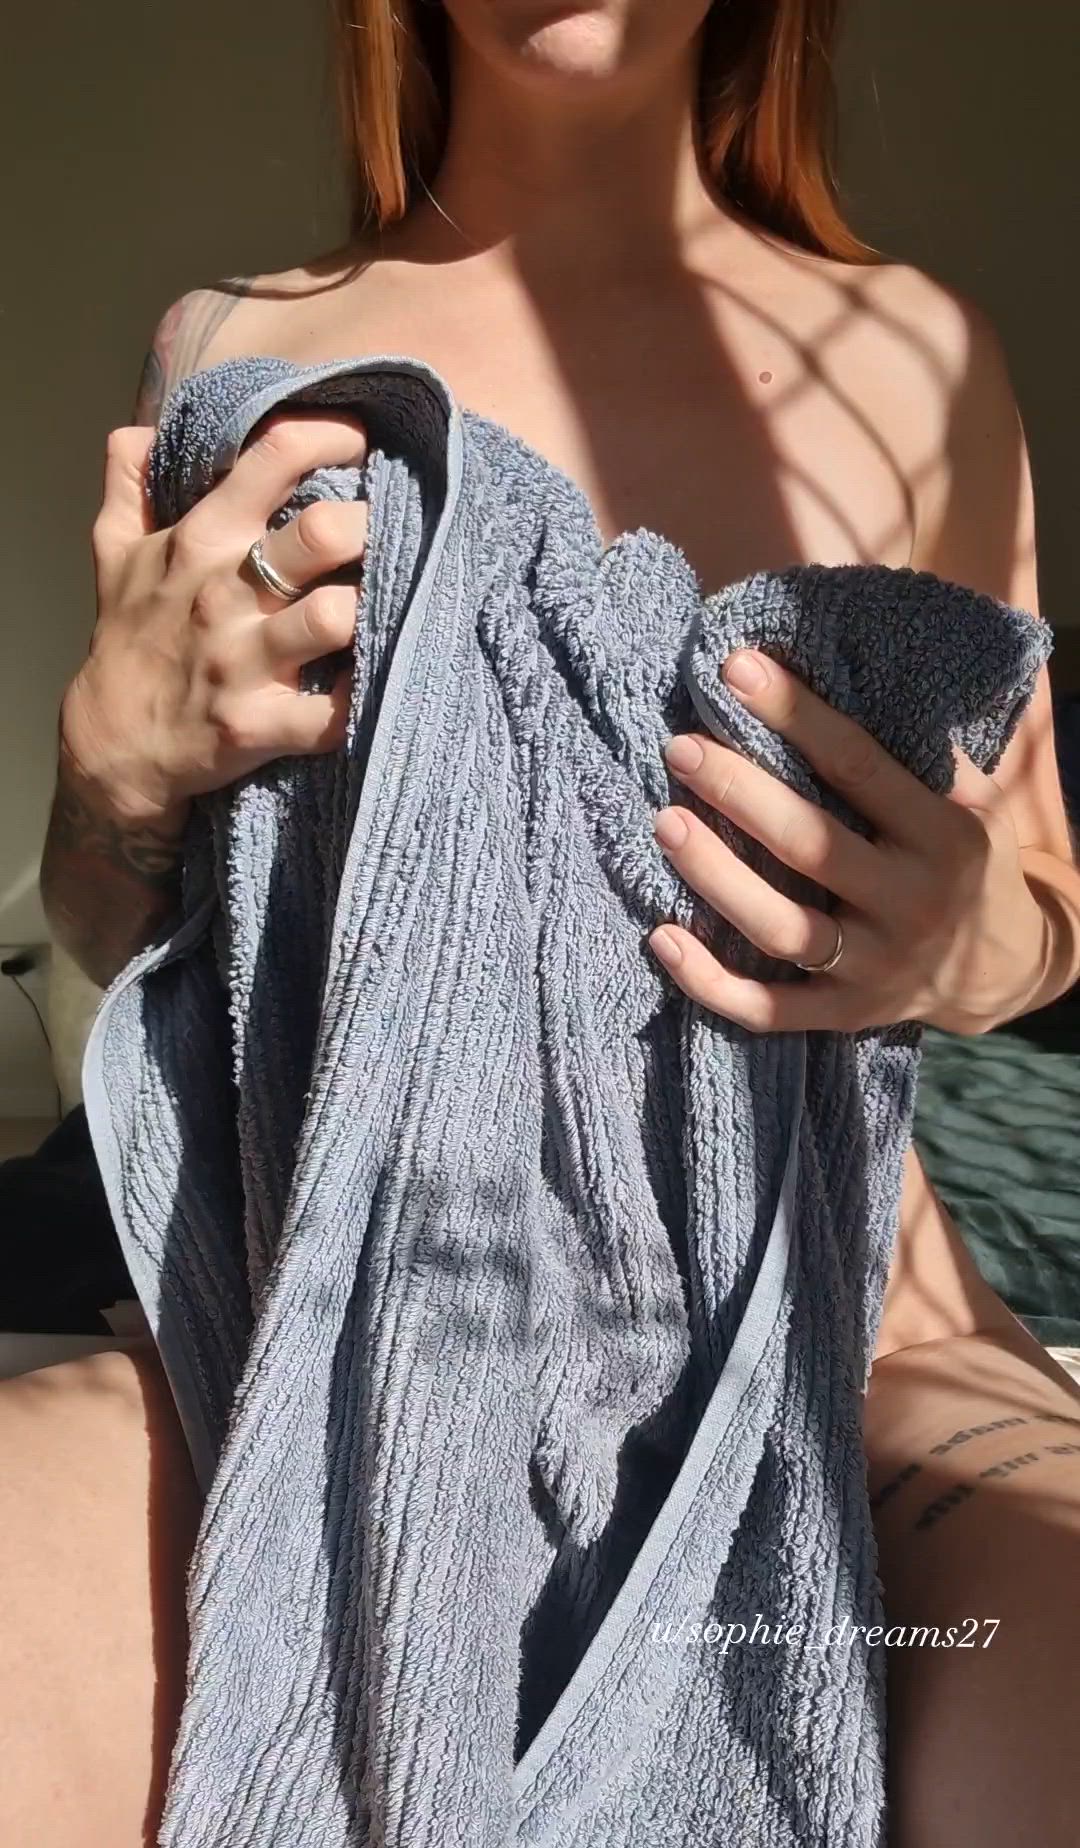 Pussy porn video with onlyfans model sophdev <strong>@sophie.d27</strong>